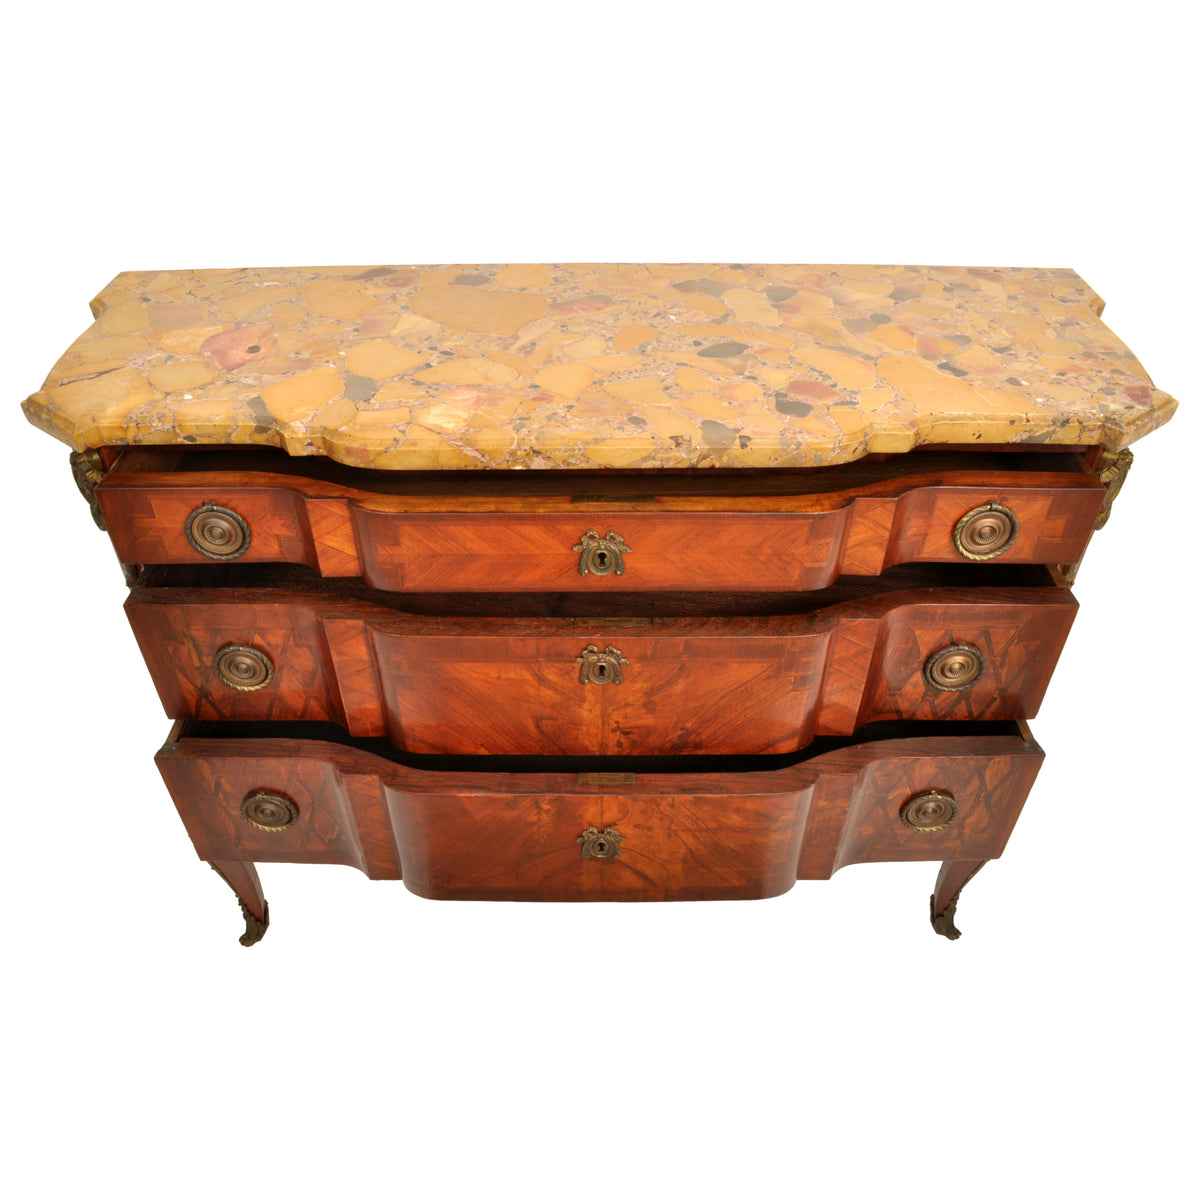 Antique French Louis XV Inlaid Parquetry Ormolu Marble Top Commode / Chest, circa 1780